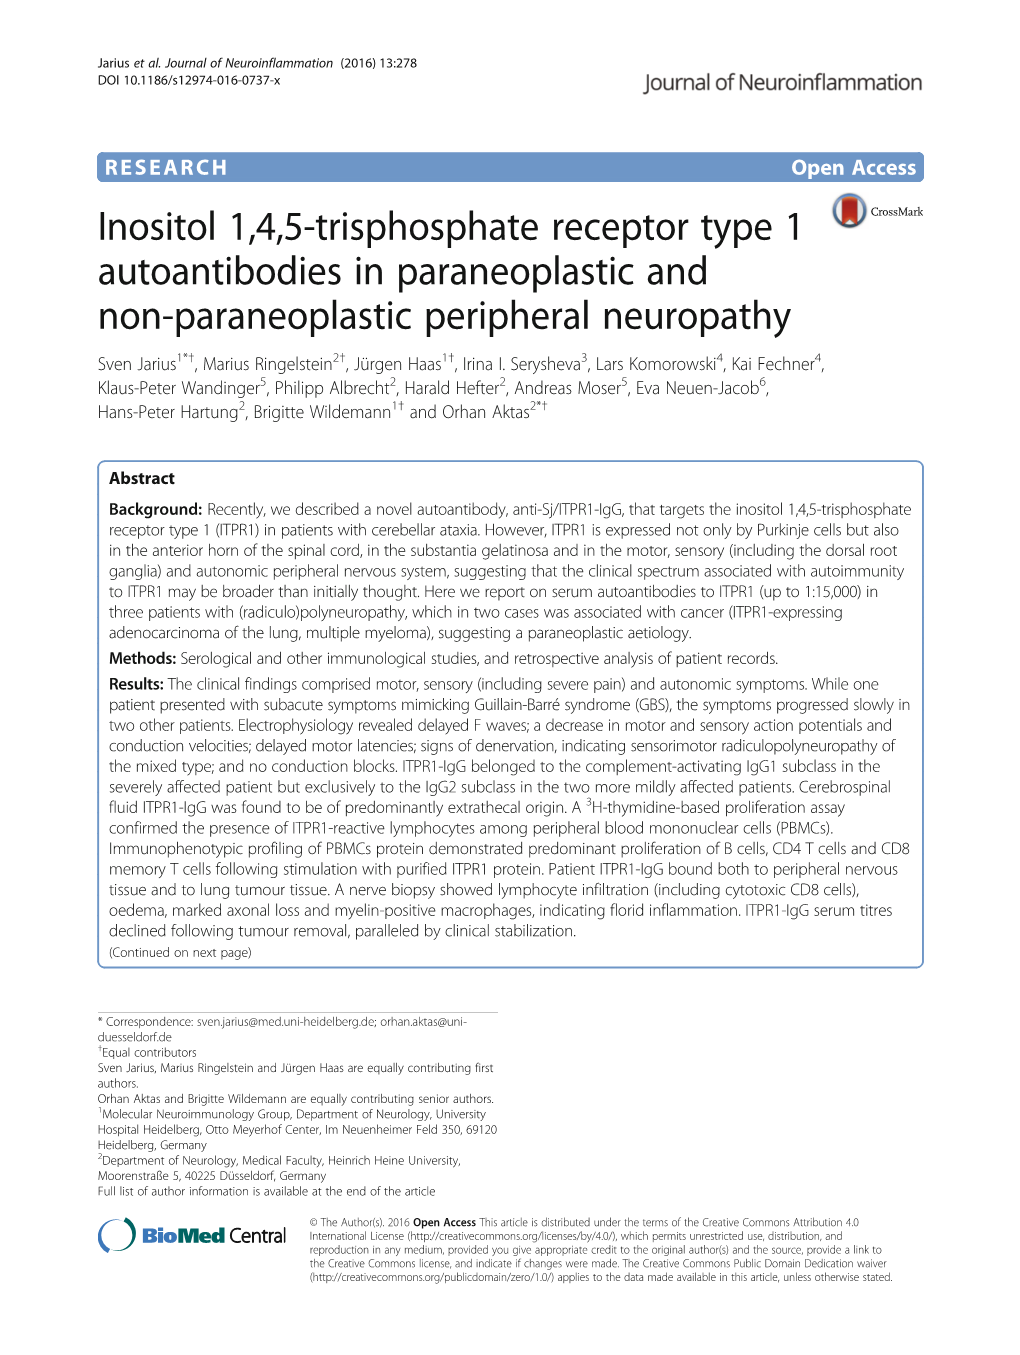 View Boards of the Paraneoplastic Aetiology of ITPR1 at Least in a Subset of Participating Centres and Patients 1 and 3 Gave Written Informed Consent